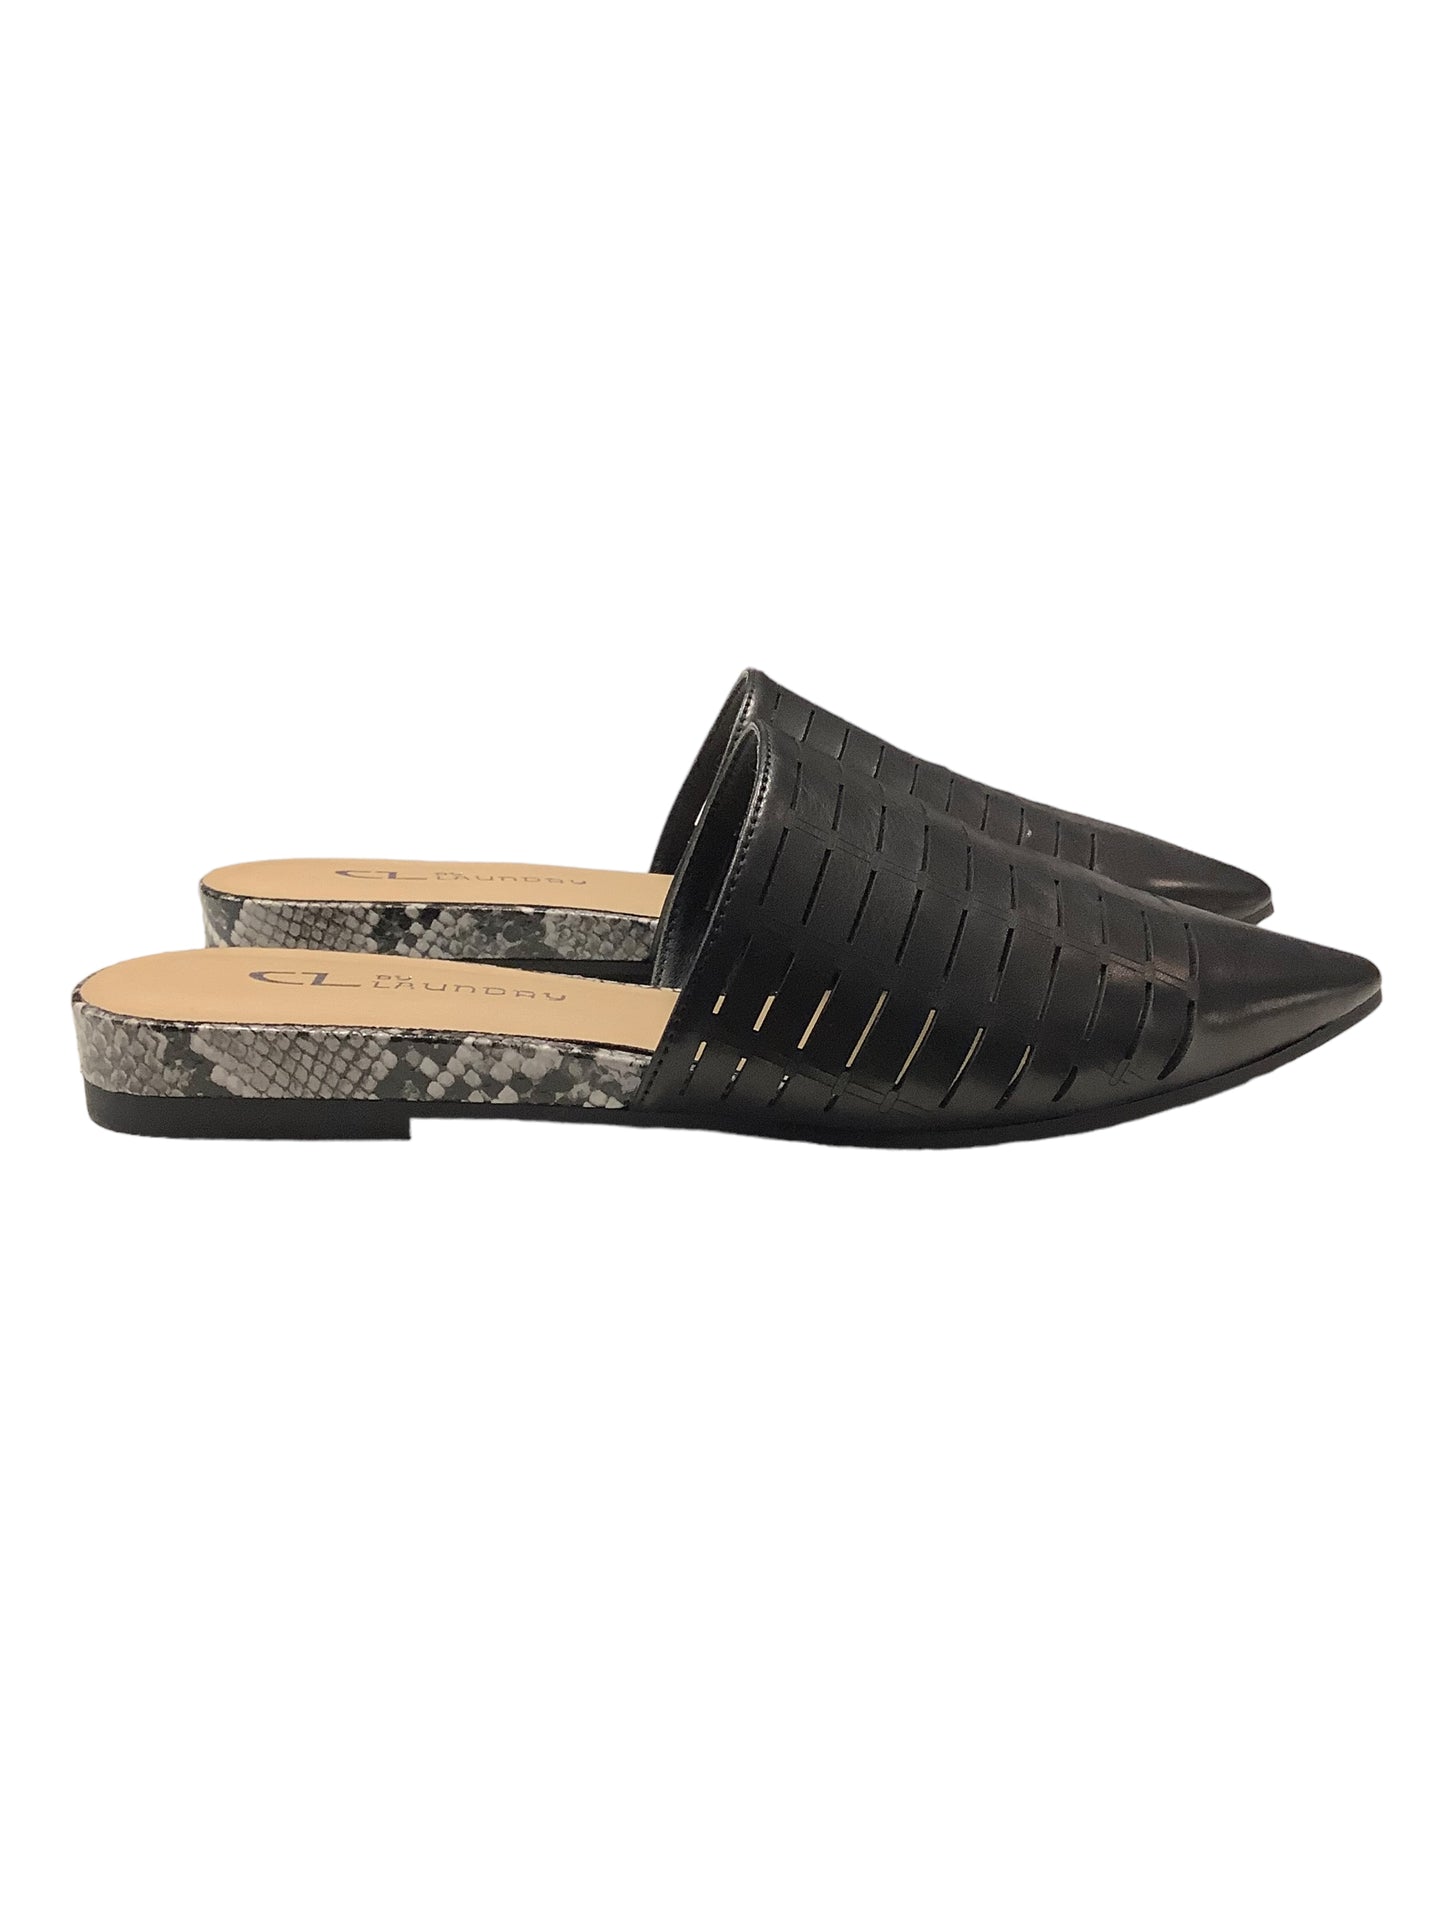 Shoes Flats Mule & Slide By Laundry  Size: 6.5